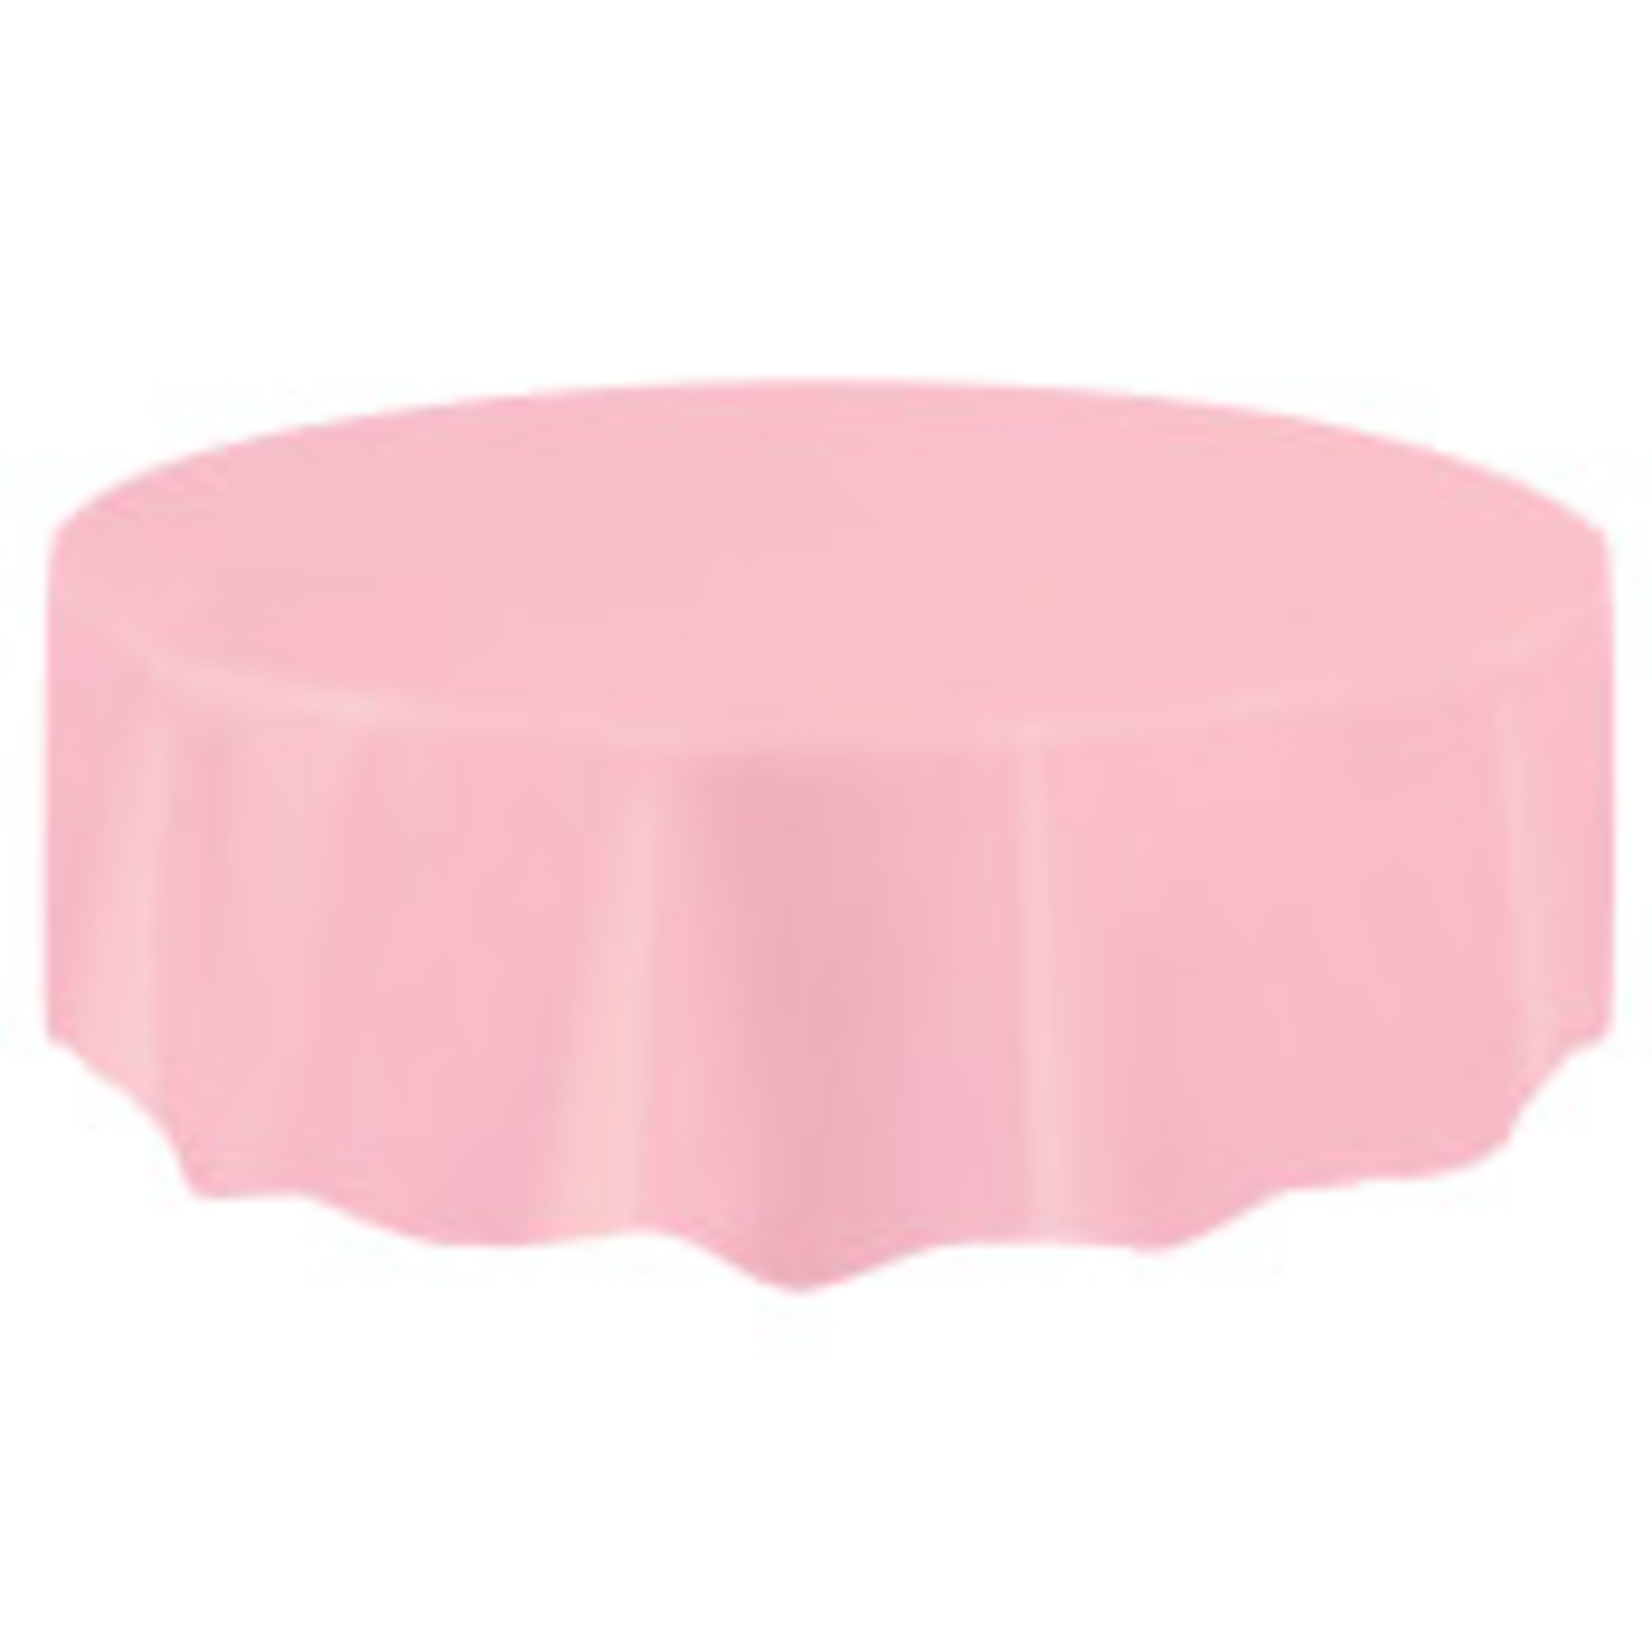 84" LOVELY PINK ROUND TABLE COVER